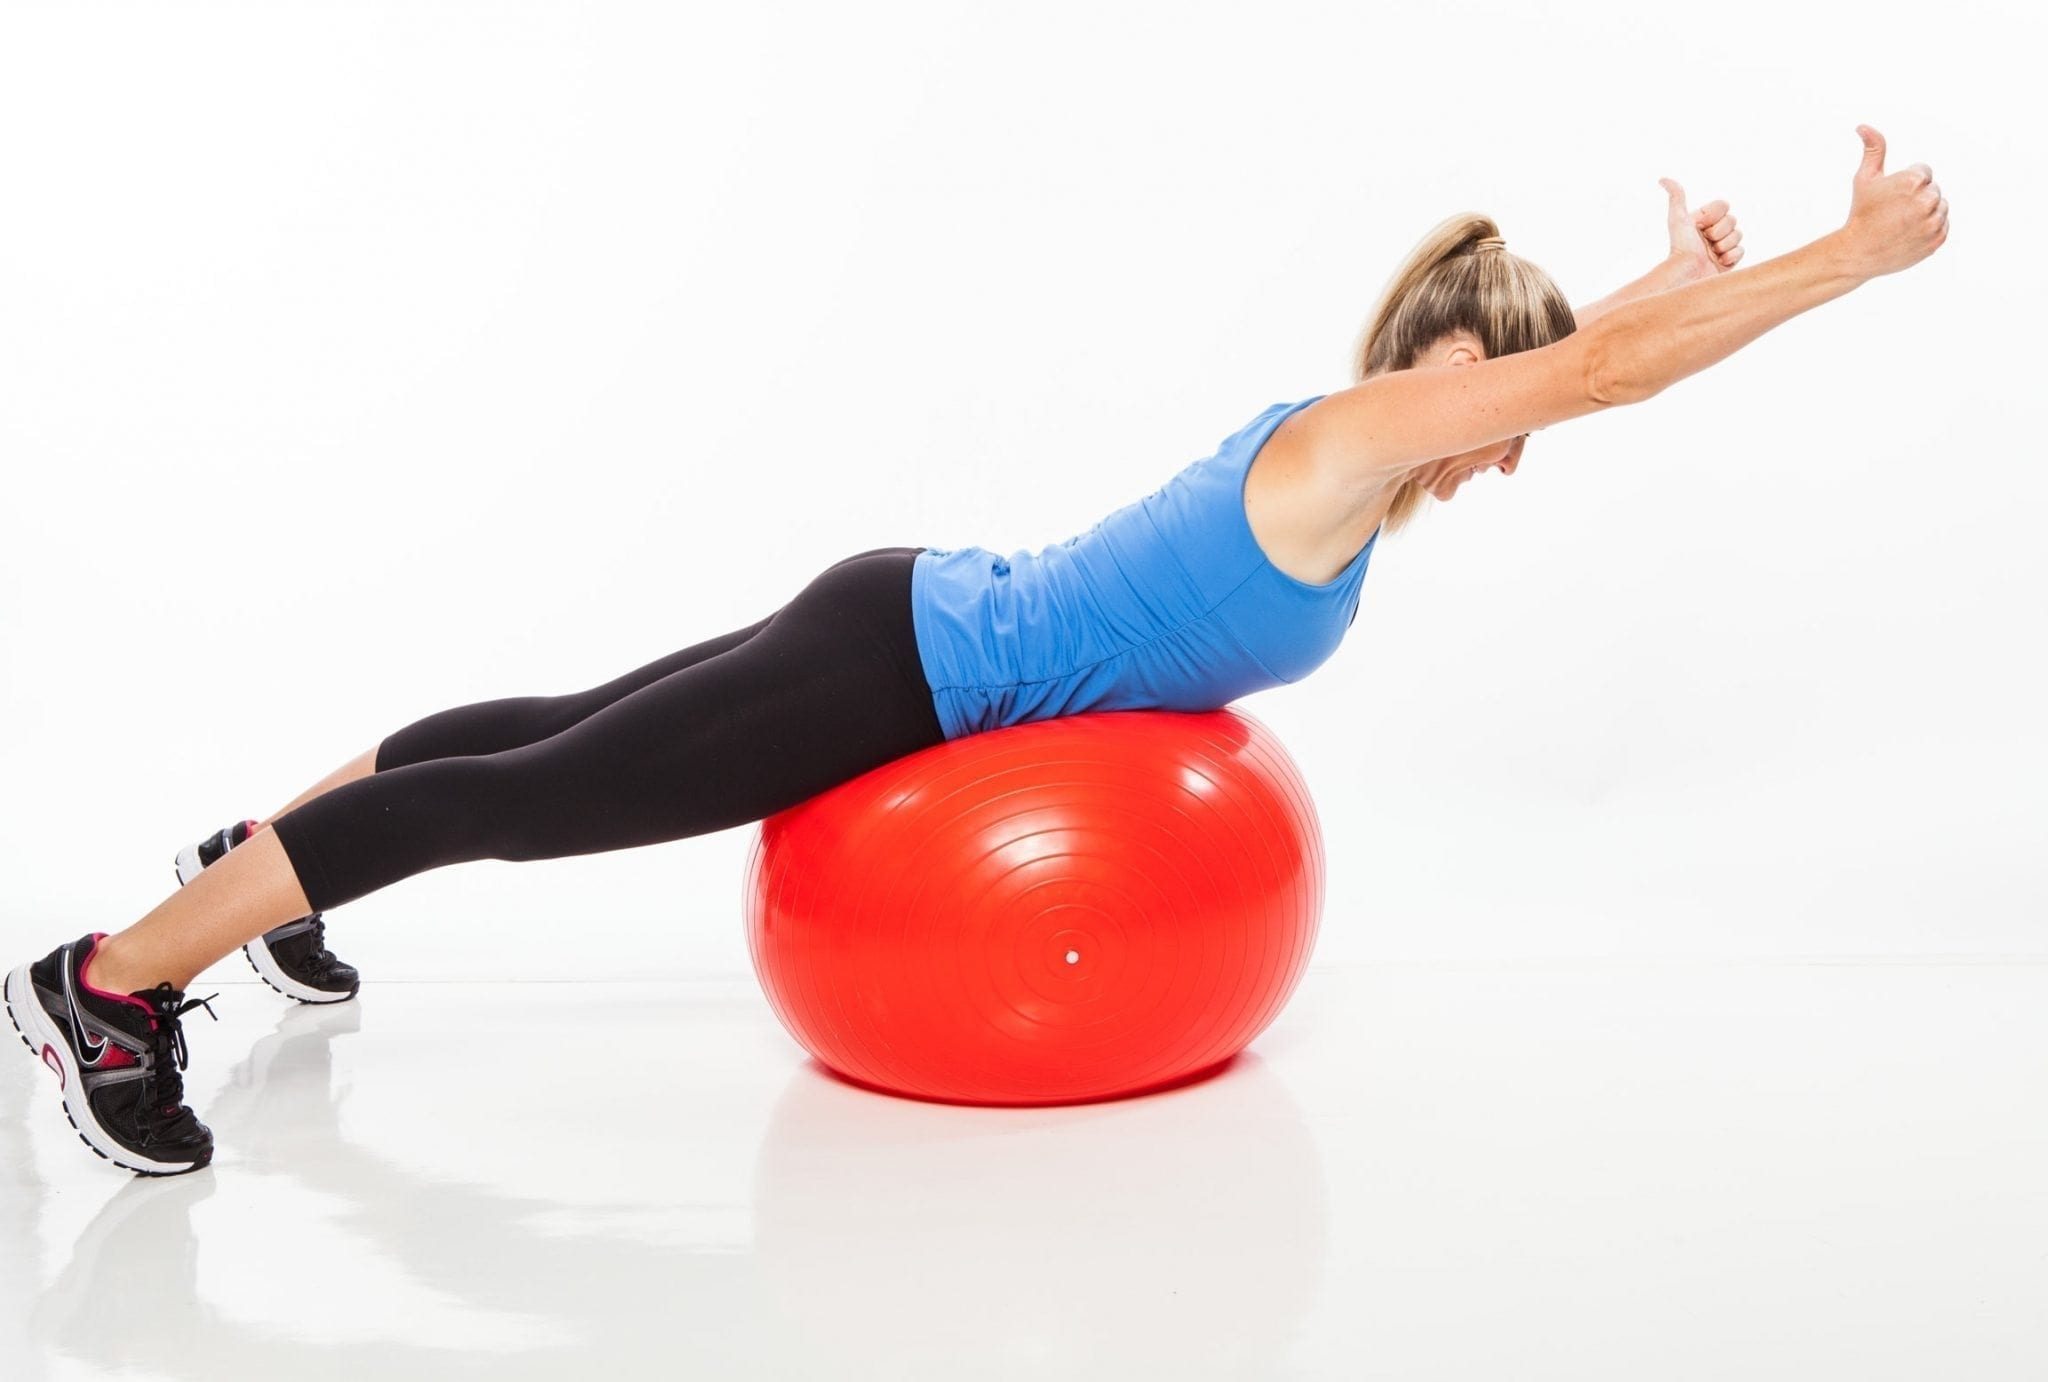 Stability Ball Workouts Article 2 